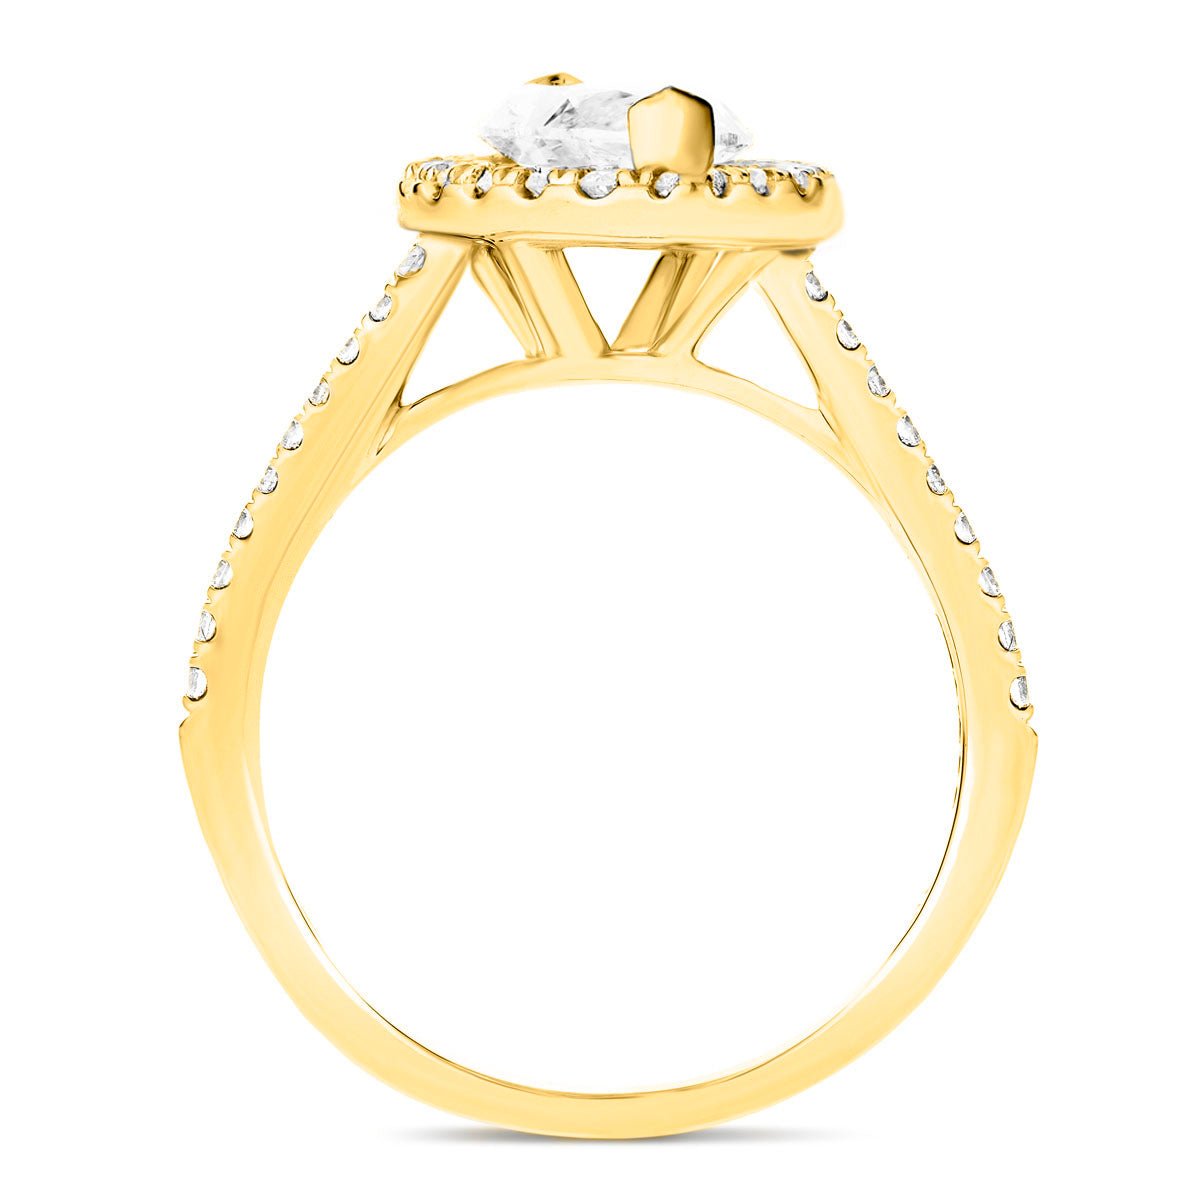 Certified Twist Marquise Diamond Halo Engagement Ring 1.50ct G/SI in 18k Yellow Gold - All Diamond